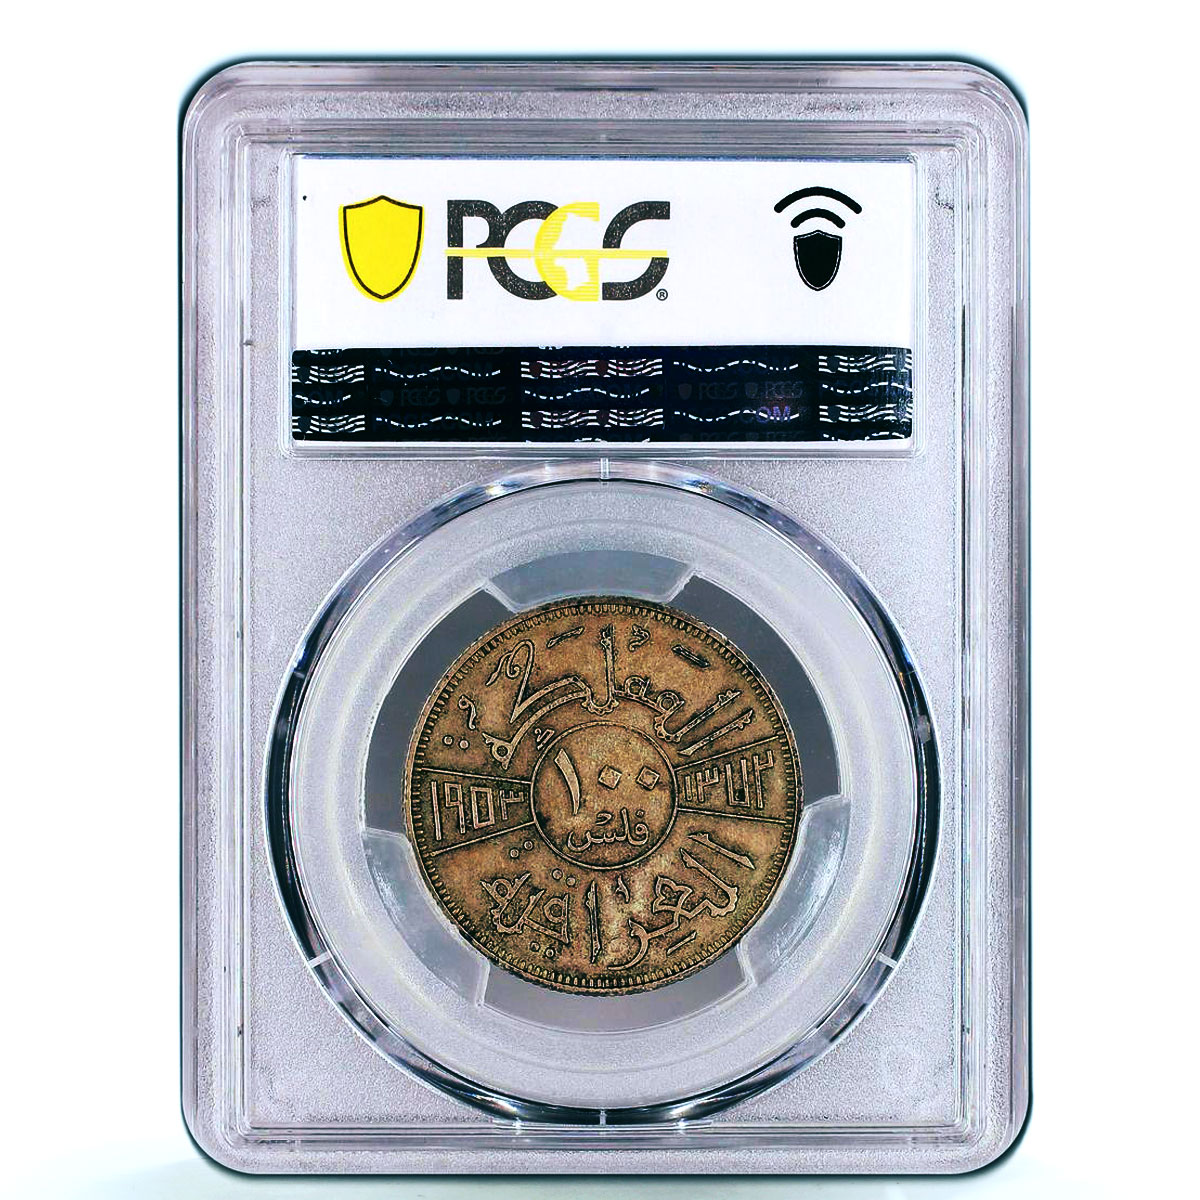 Iraq 100 fils State Coinage King Faisal II Coat of Arms AU53 PCGS Ag coin 1953